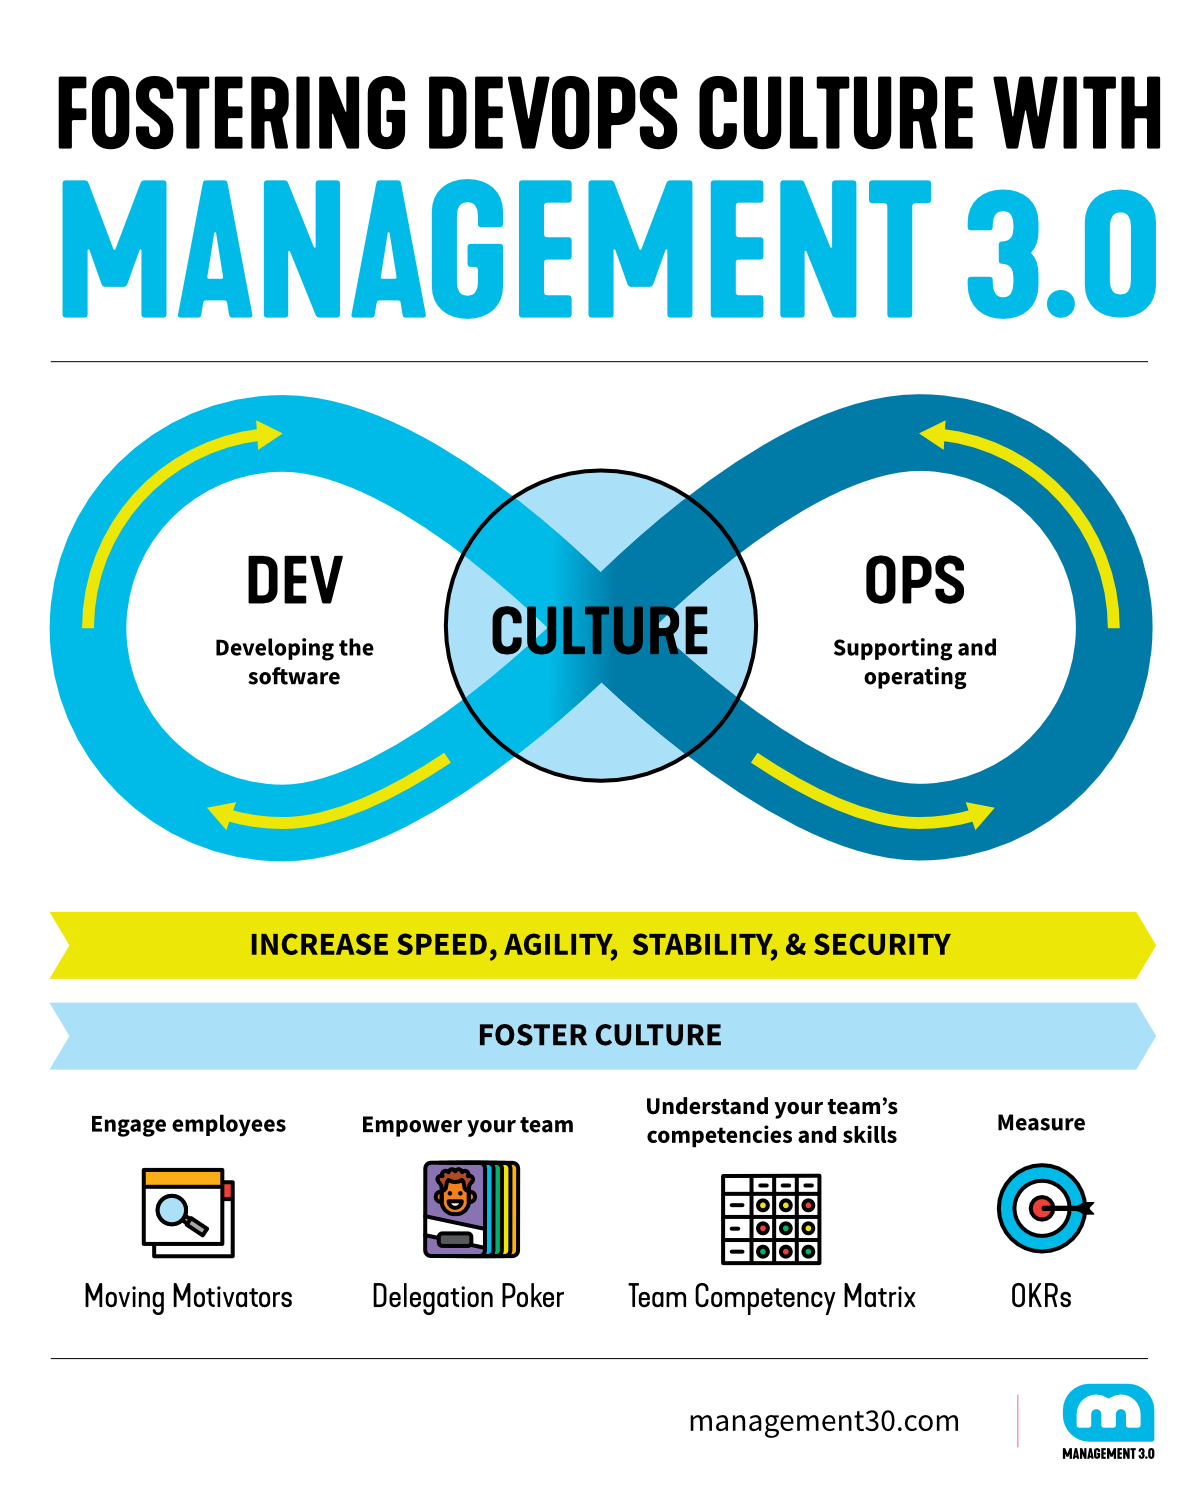 Fostering DevOps Culture Is More Important Than Technology